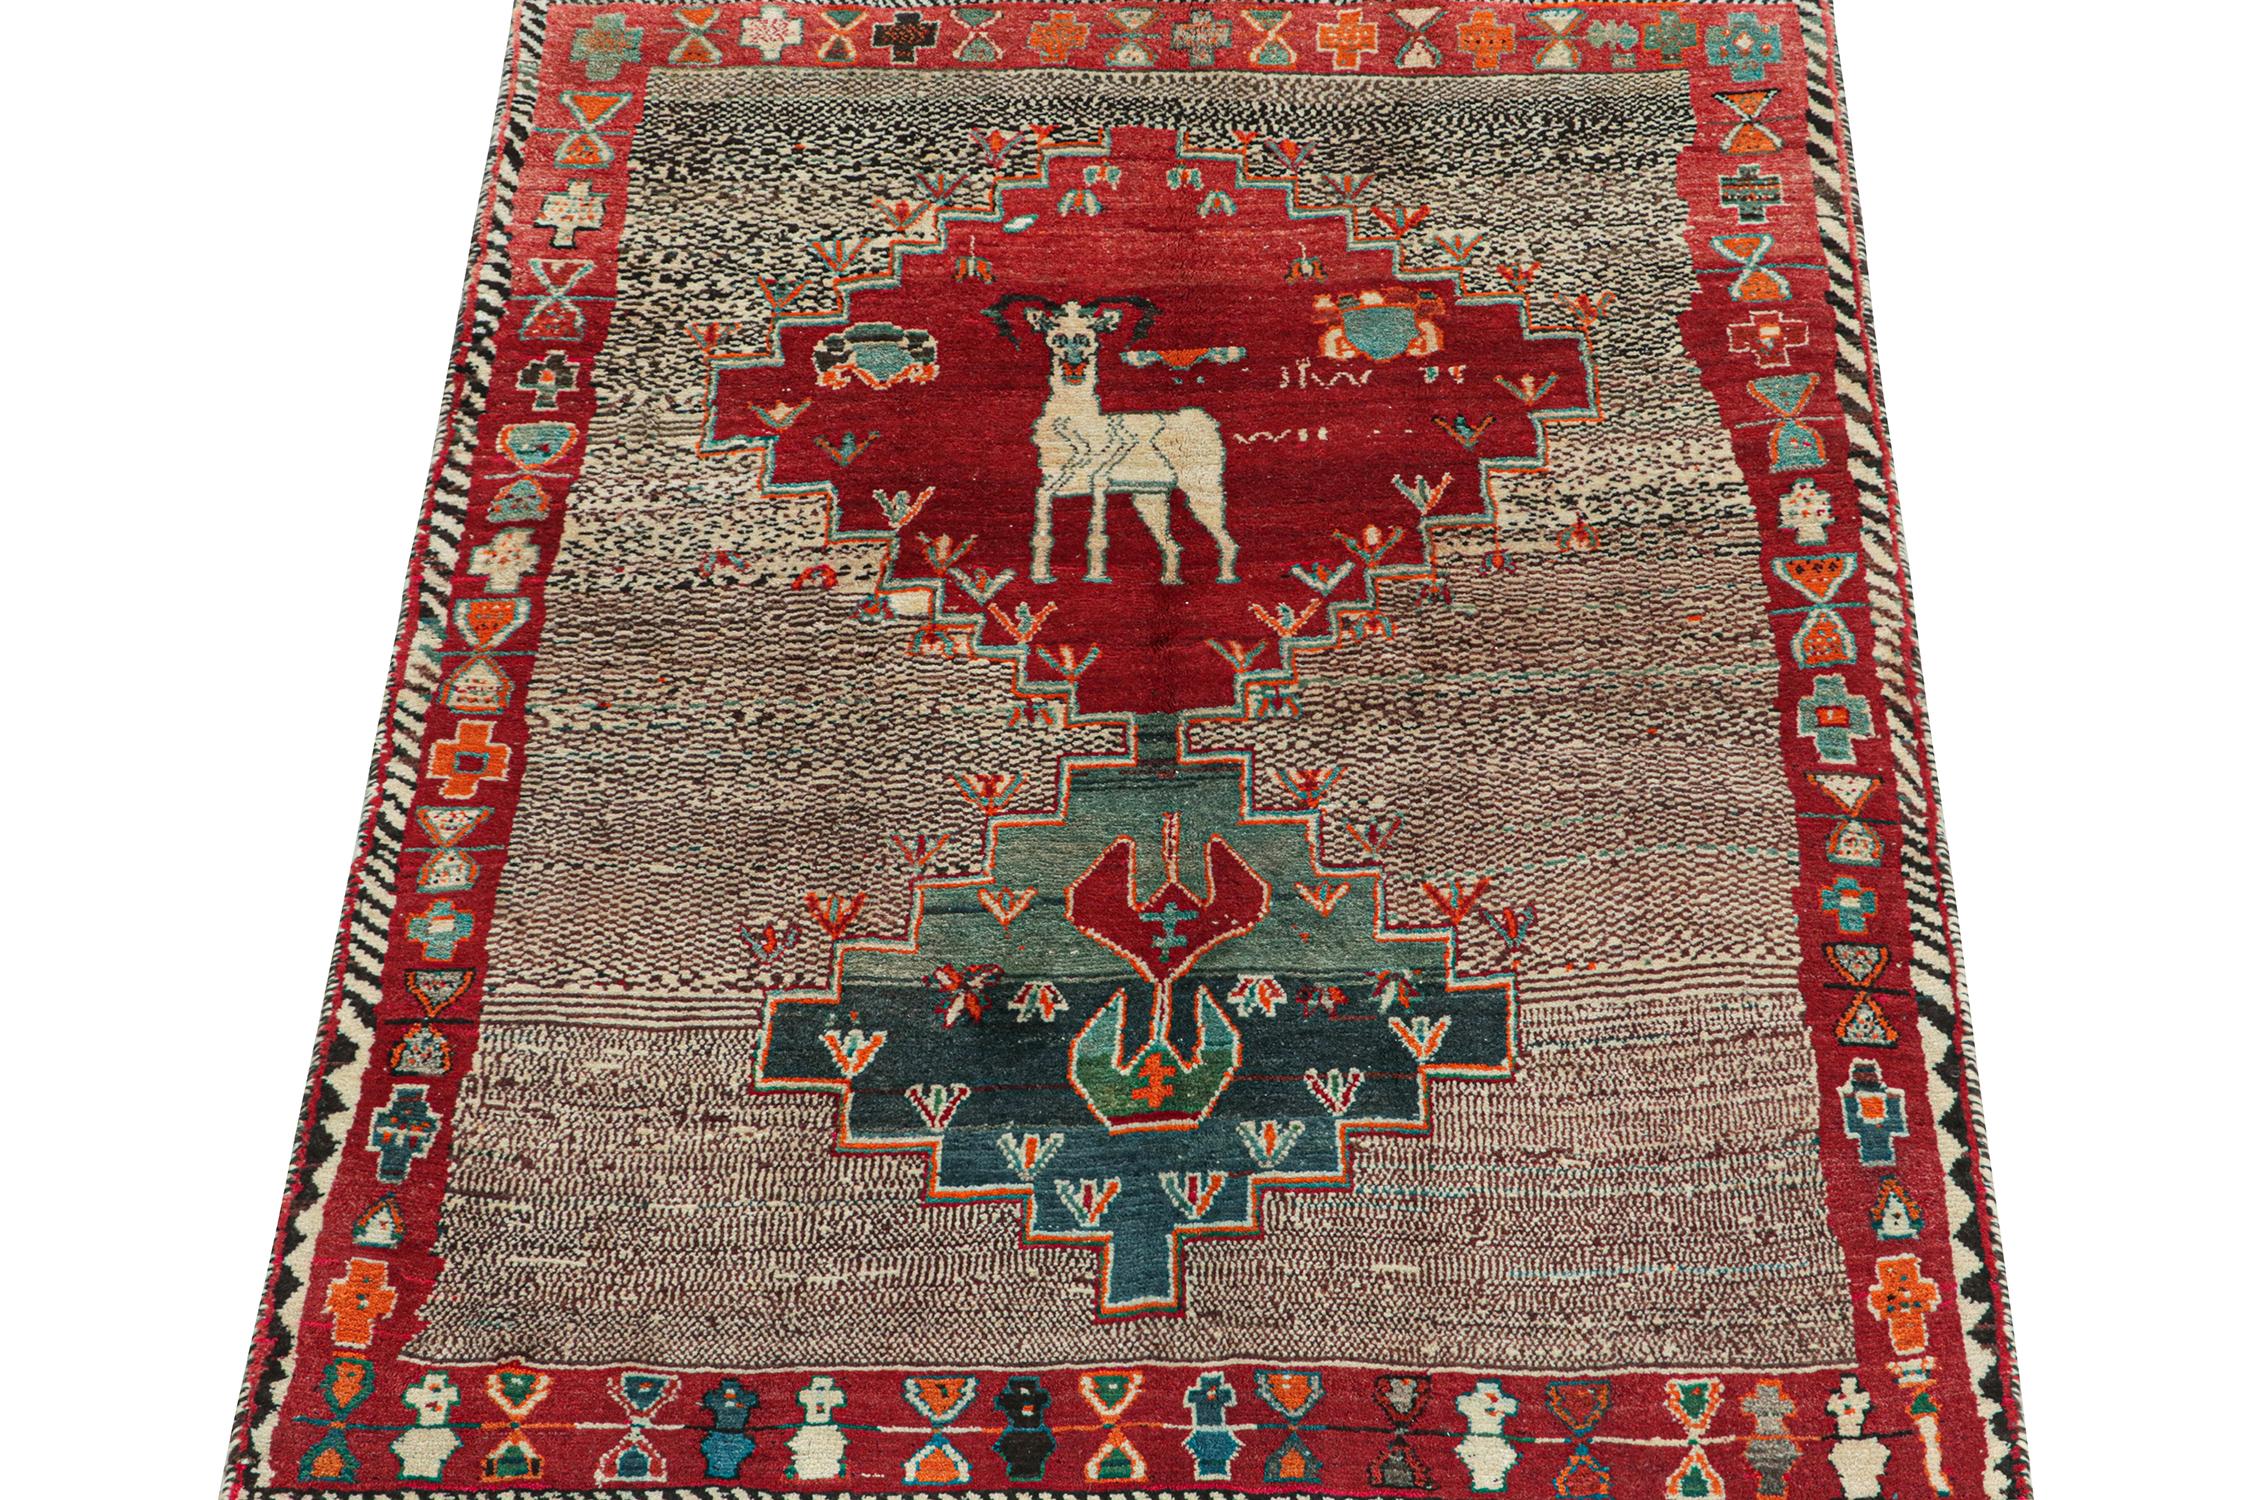 This vintage 5x7 Persian rug is a rare mid-century Gabbeh piece that originates from the Qashqai tribe. 

Hand-knotted in wool circa 1950-1960, its design plays medallion and all-over pattern style together in a bold tribal fashion.

The upper